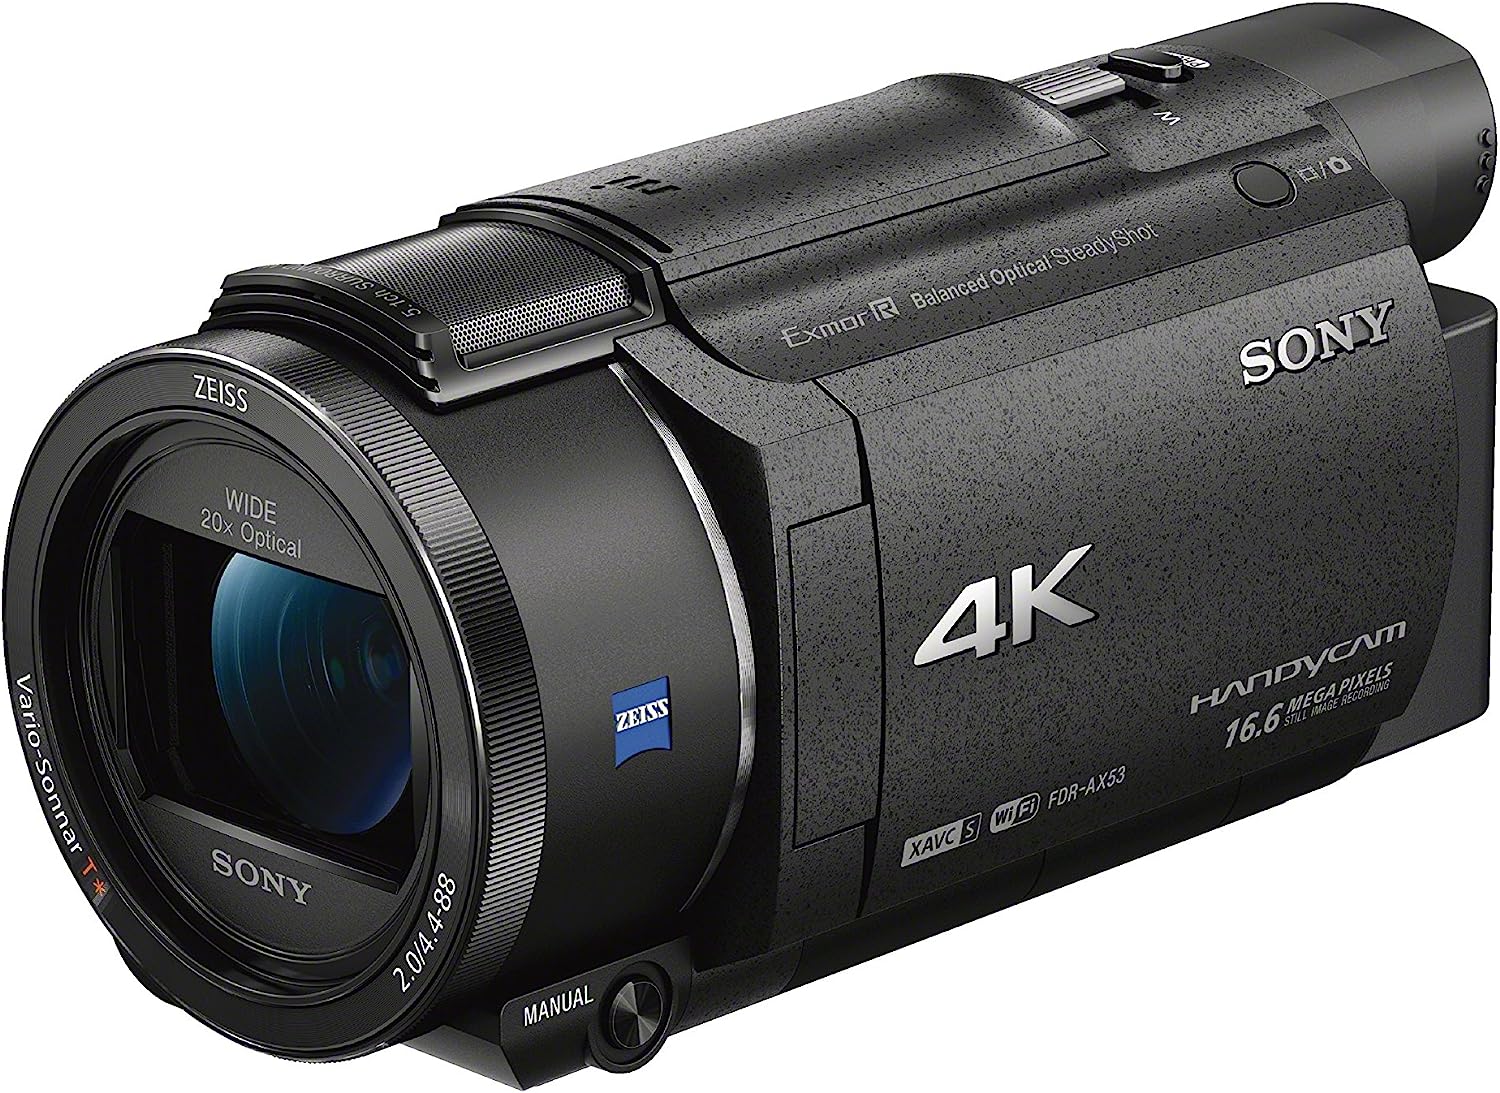 Camcorder Frame Rates: Choosing the Right One for Your Project